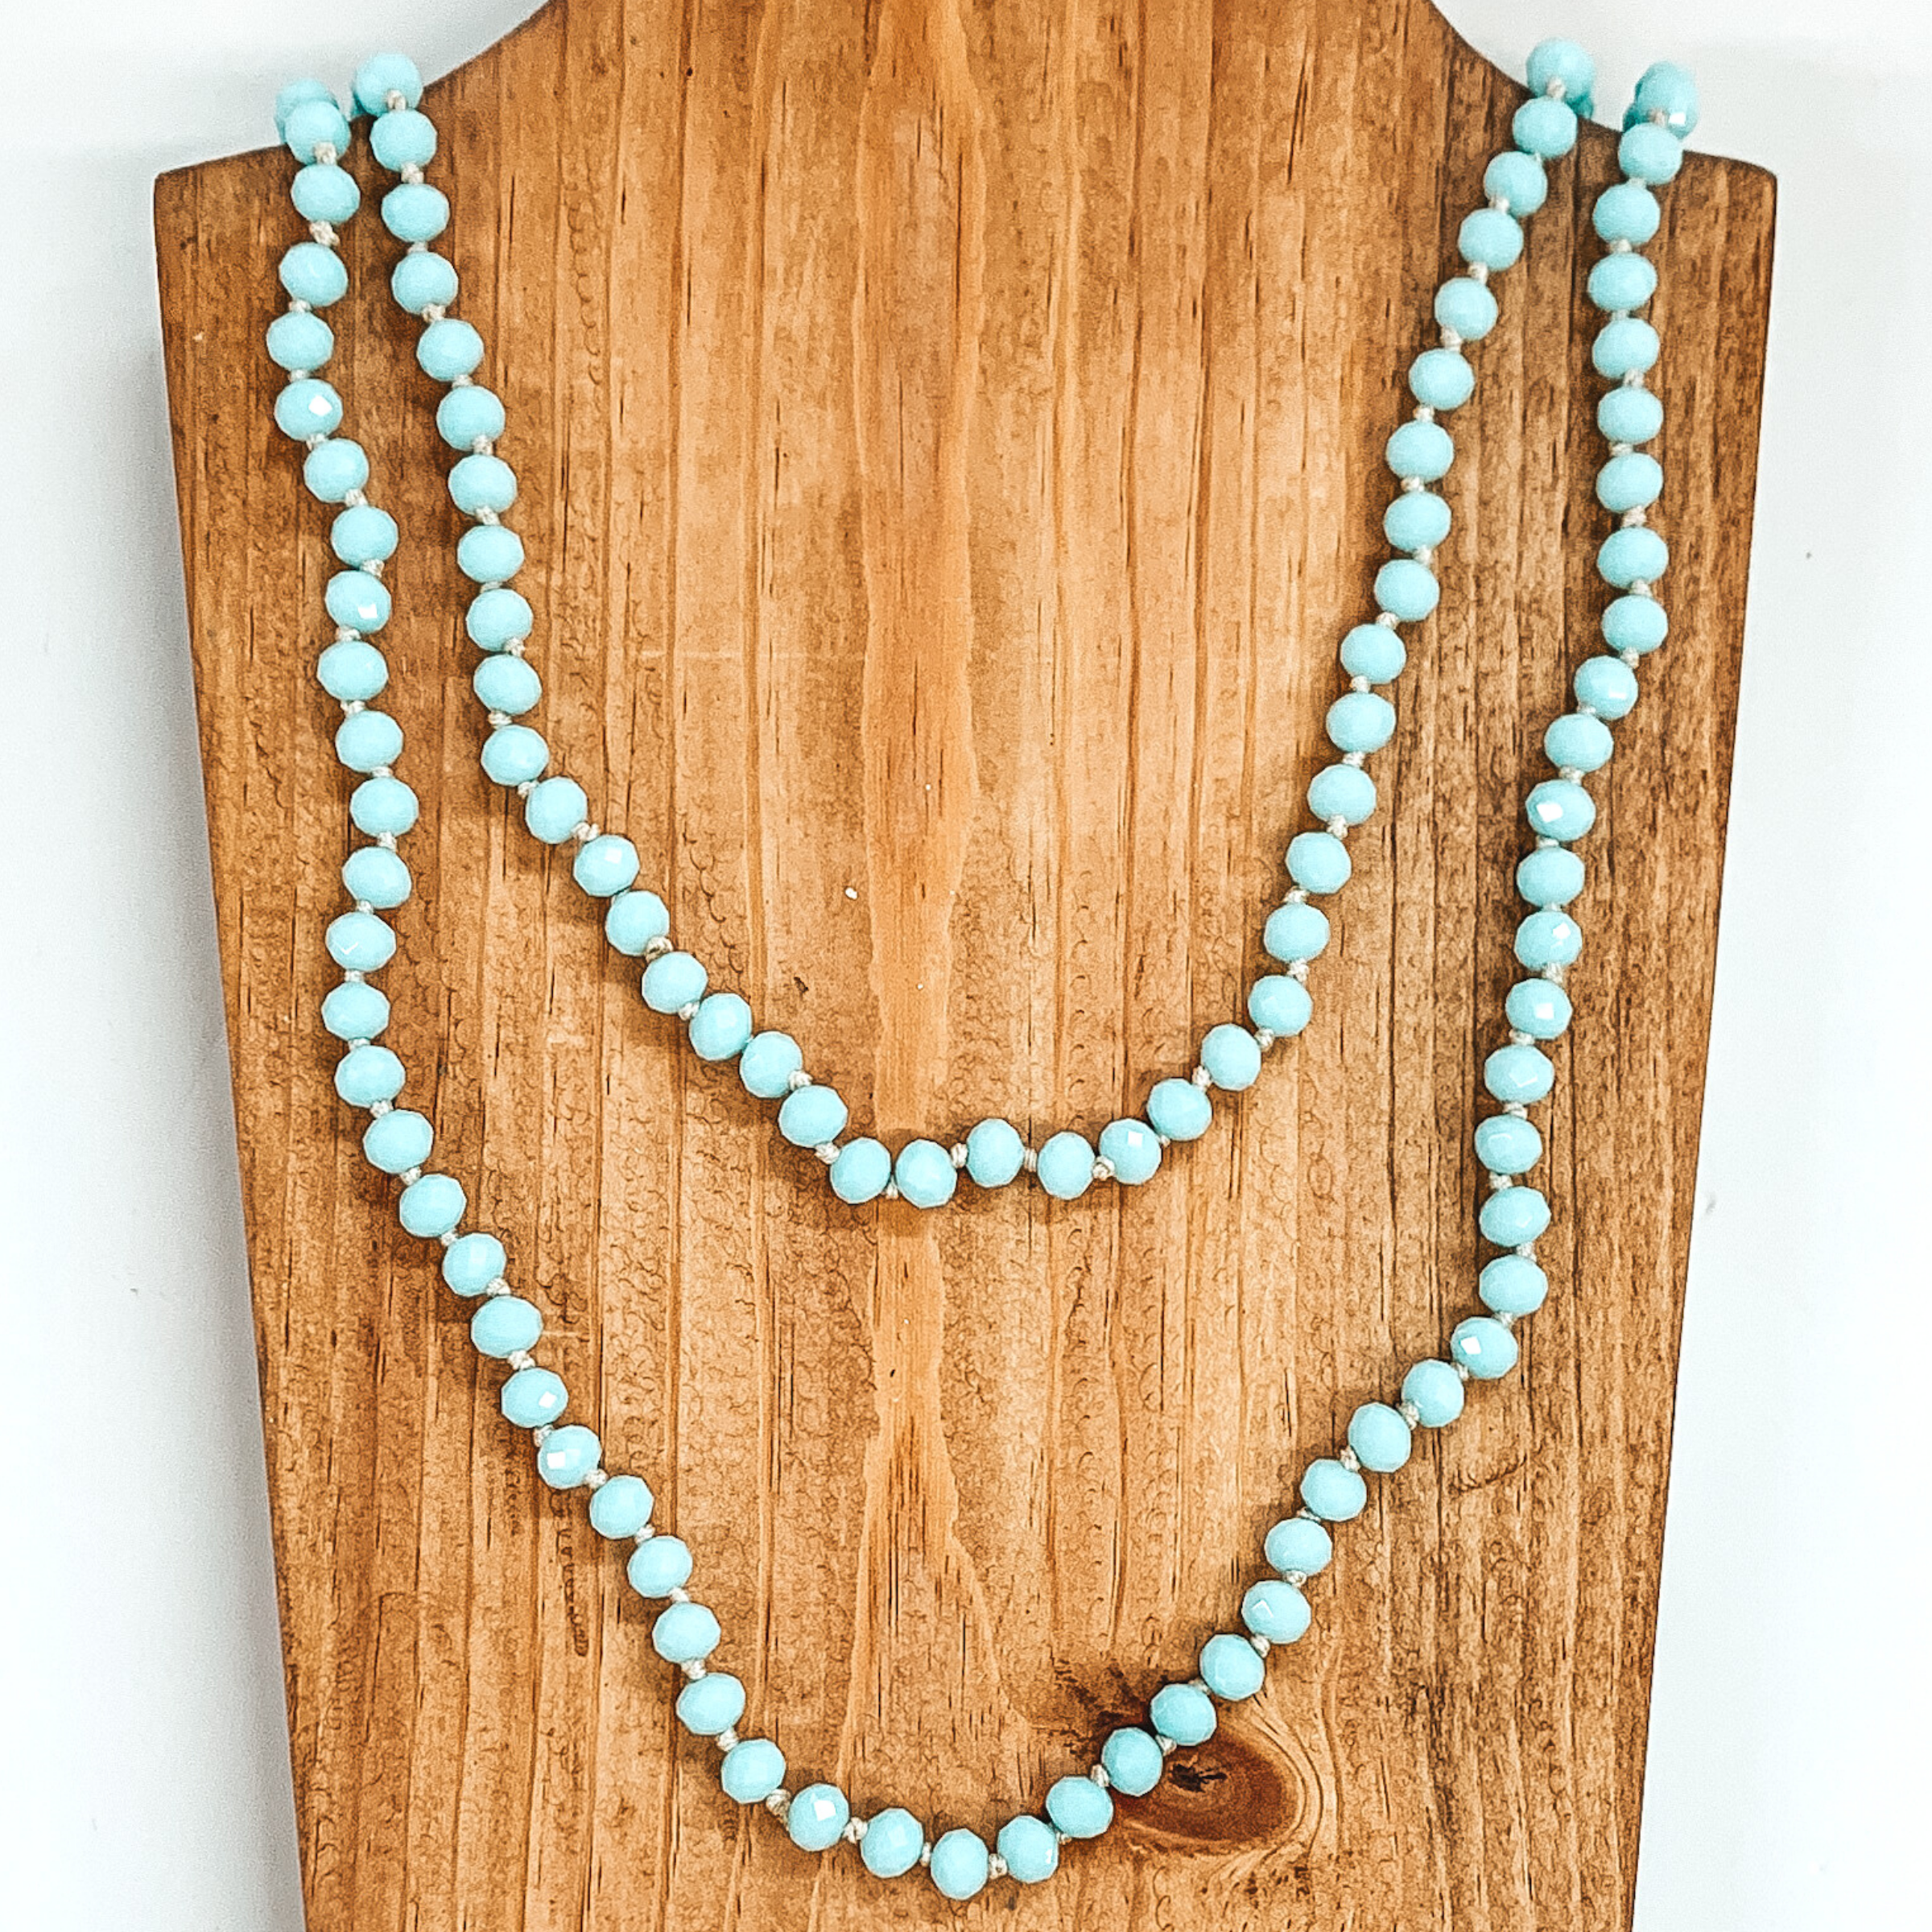 Crystal beaded necklace in pastel blue. This necklace is pictured laying on a brown necklace holder on a white background.